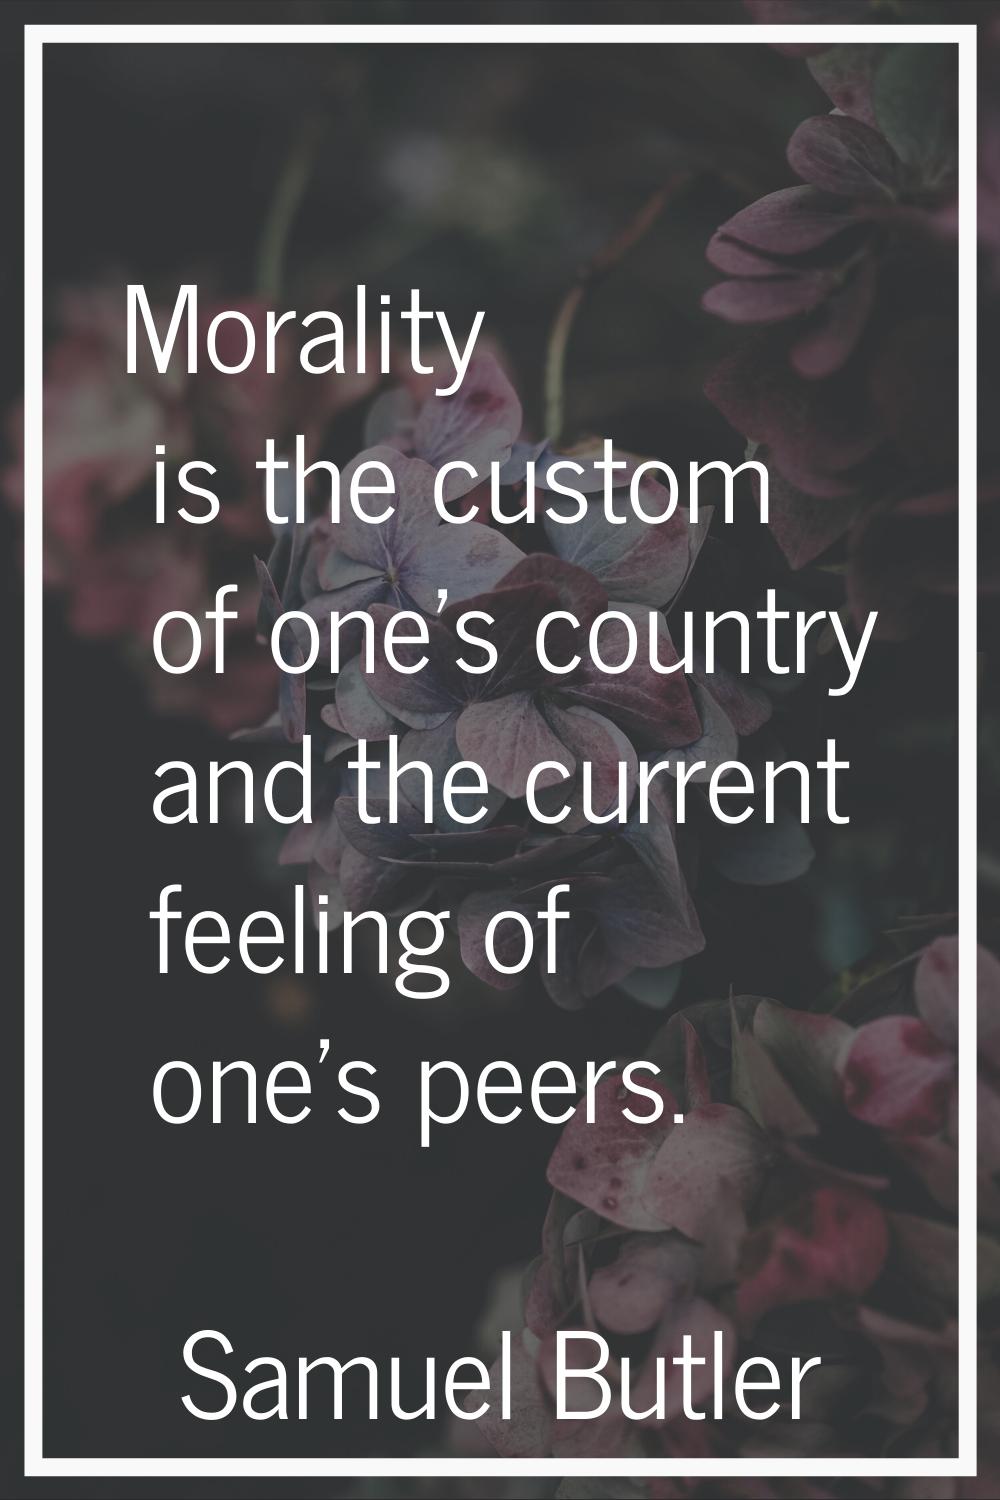 Morality is the custom of one's country and the current feeling of one's peers.